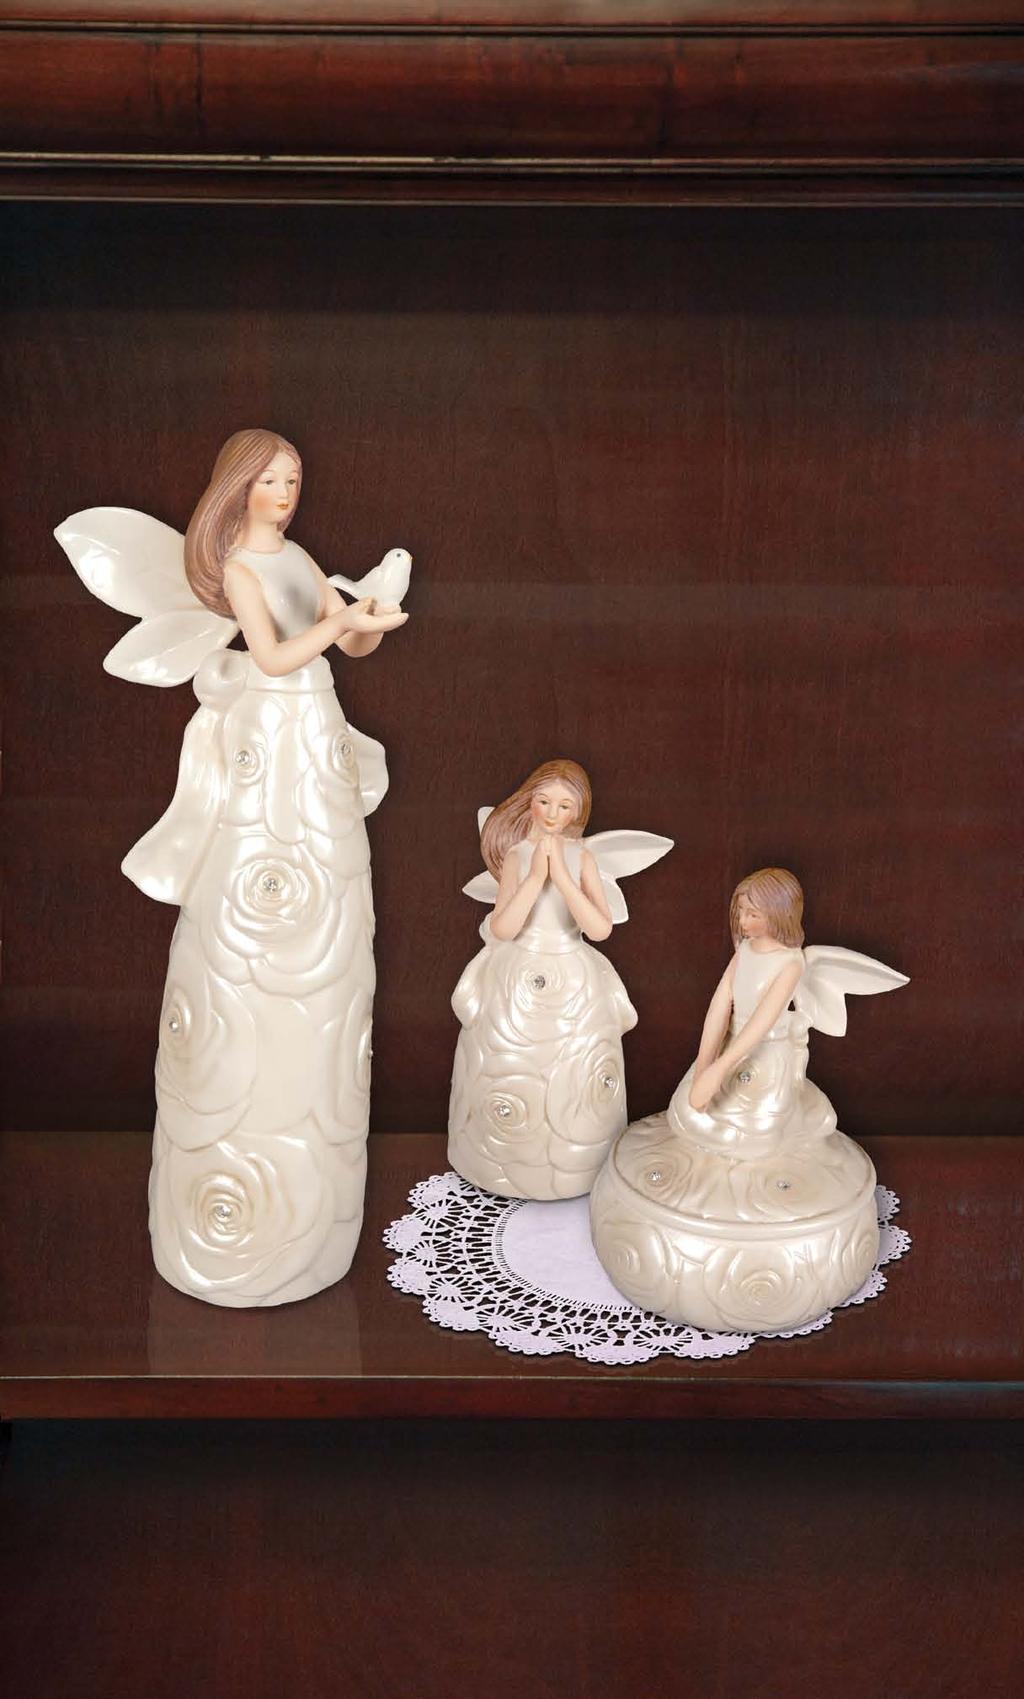 3 Glassware Little Things figurines Aunt Birdie Inspirational Gifts Rose porcelain figurines